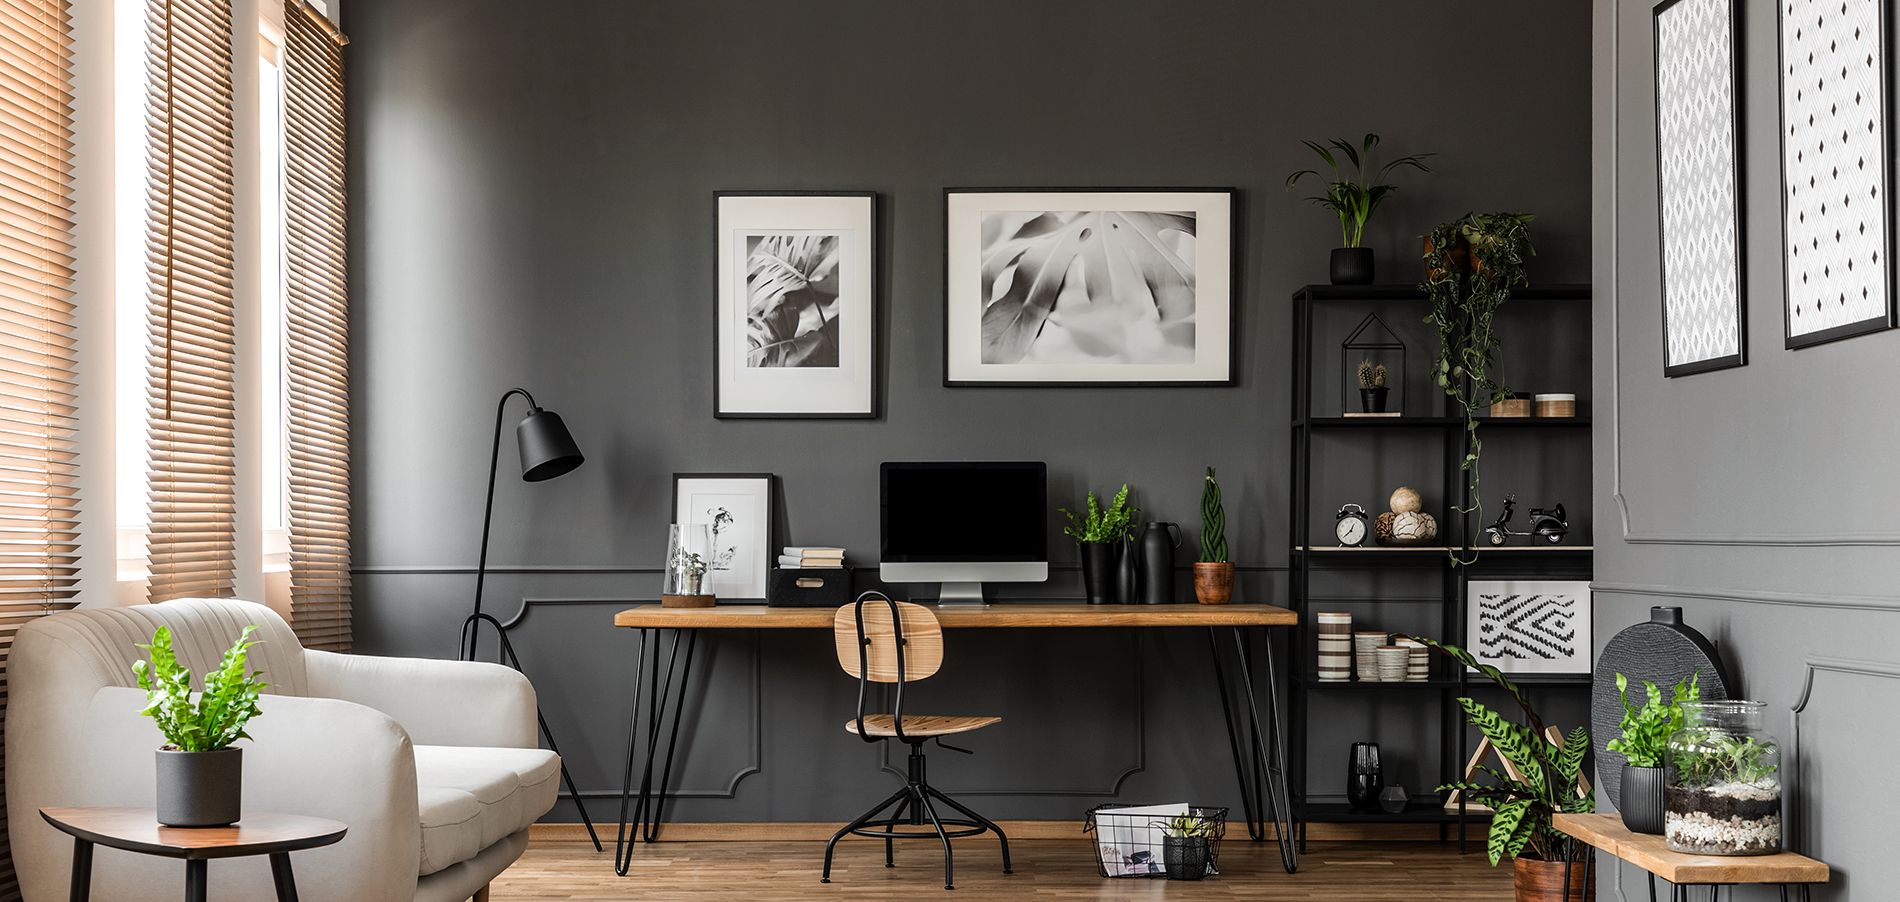 What Privacy Solutions Are Recommended For A Home Office Environment? Digital Workspace Privacy